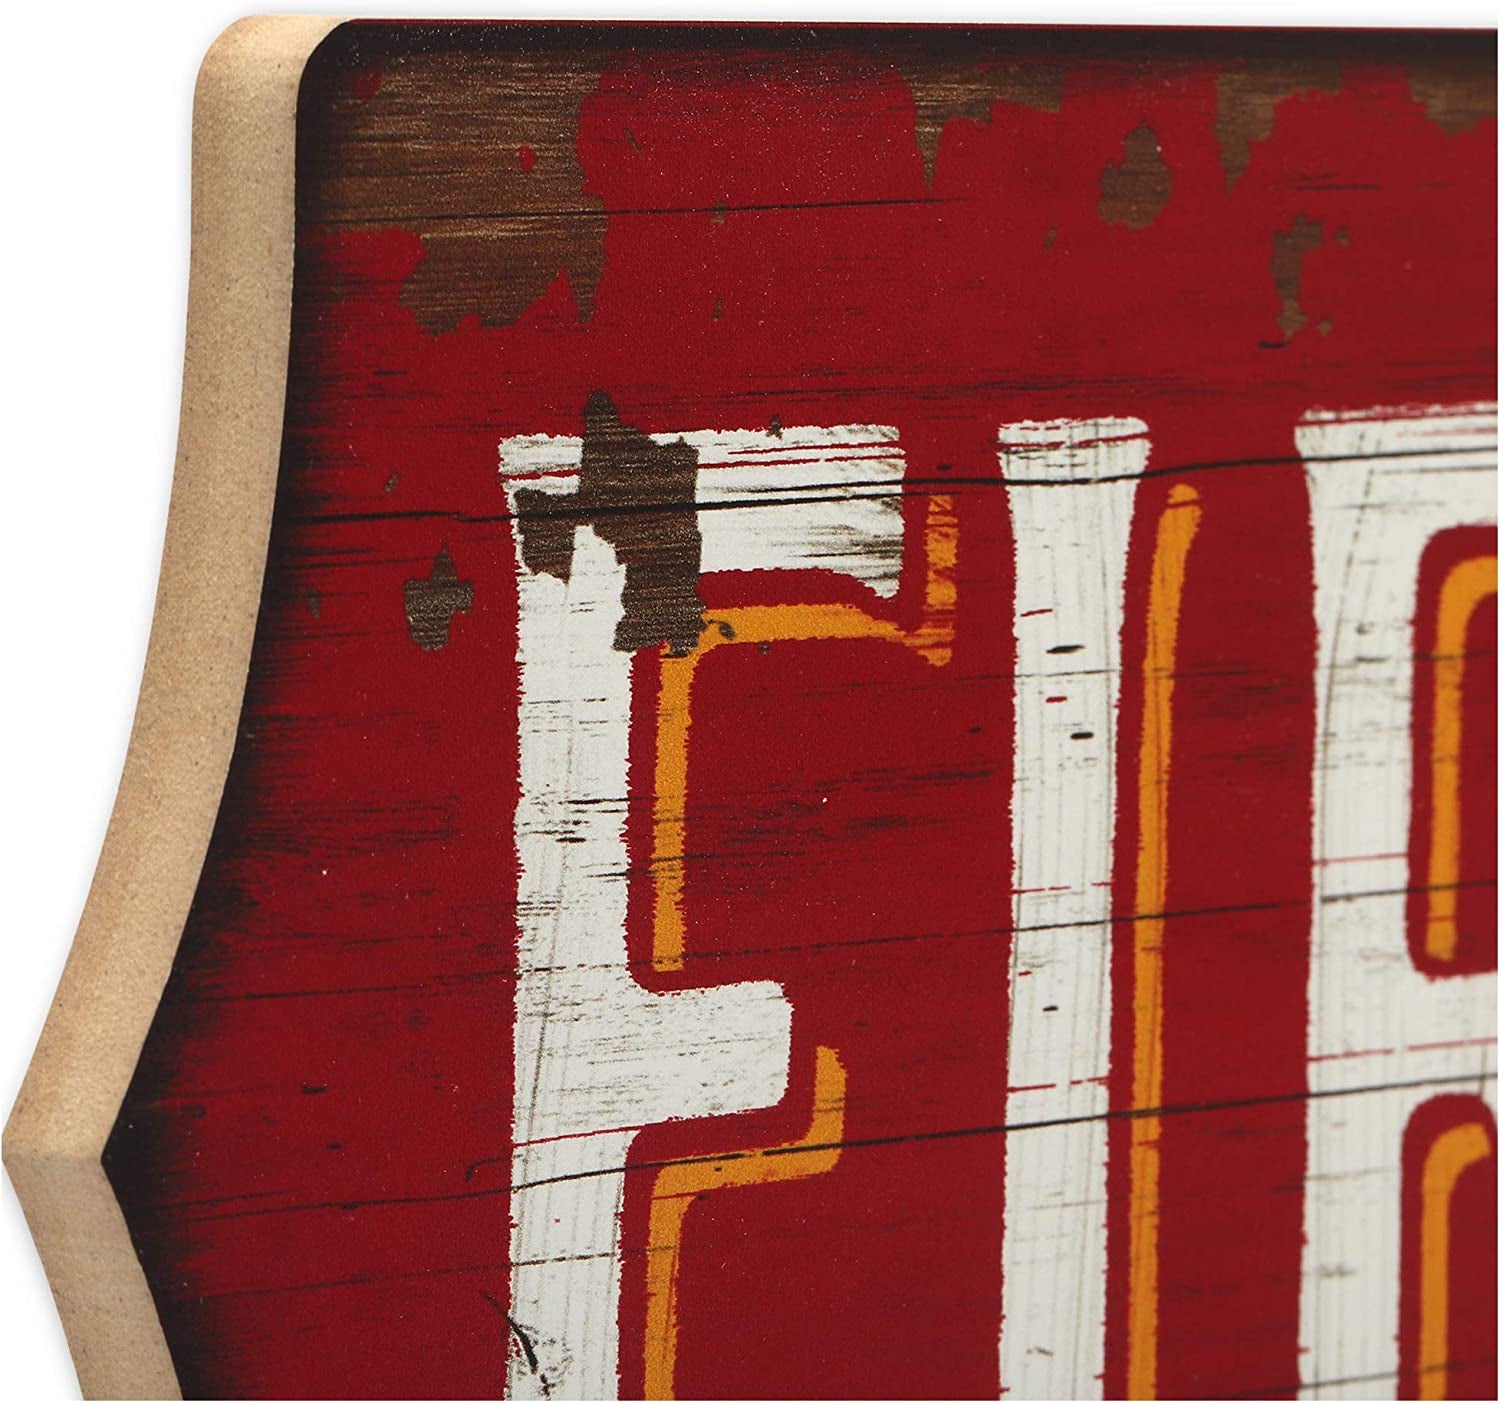 Fire Station No 1 Distressed Wood Wall Decor - Large Firefighter Sign for Man Cave, Garage or Basement